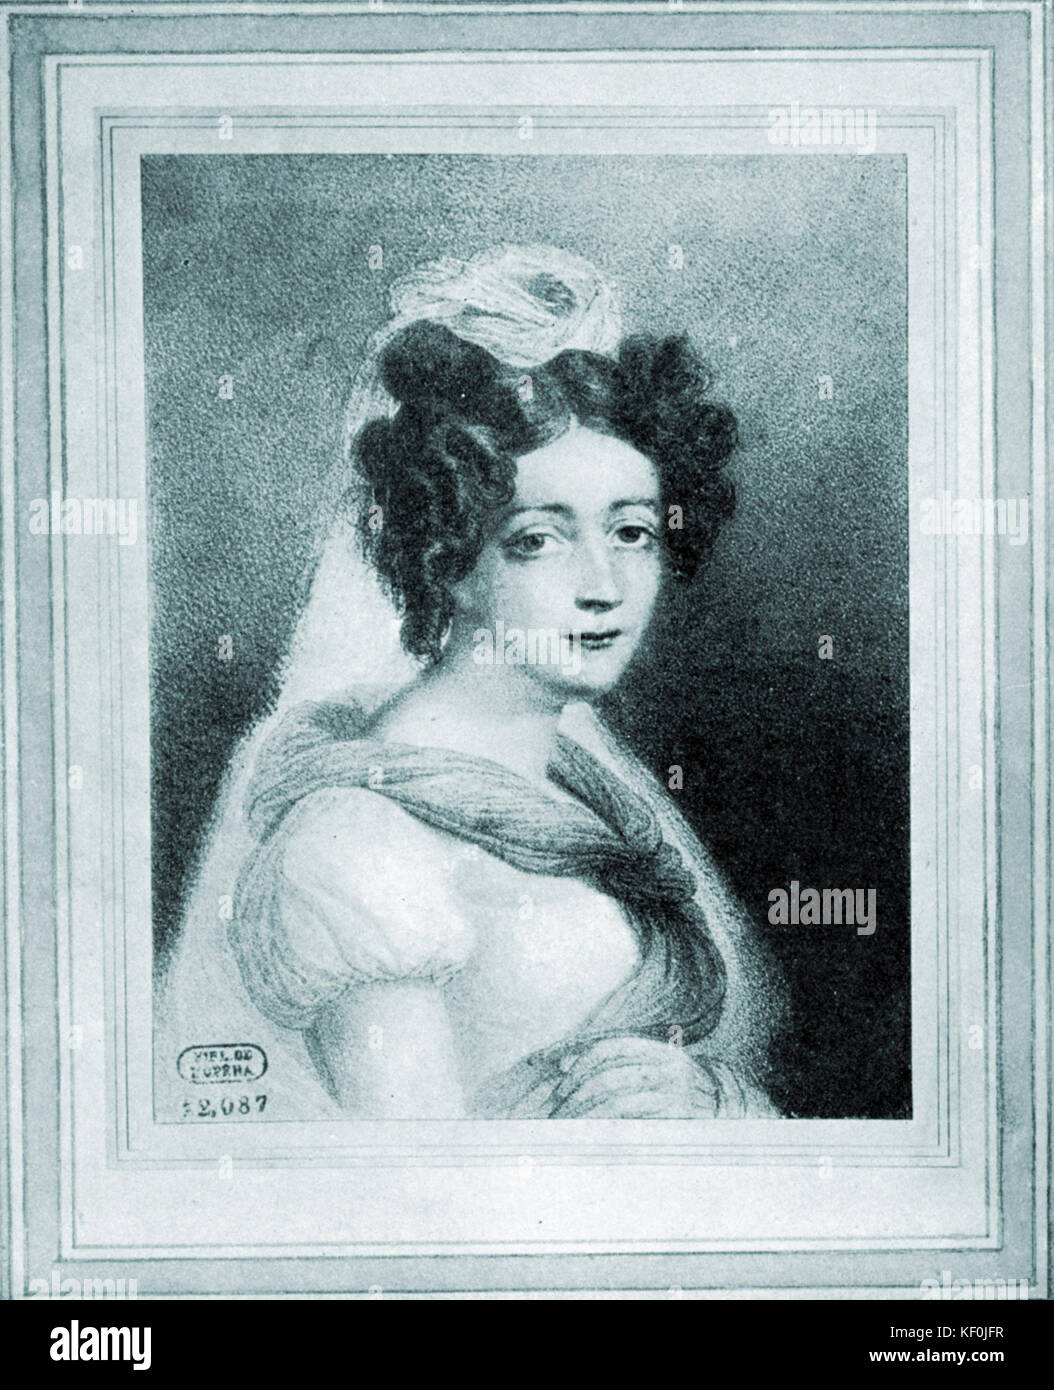 Berlioz's wife Harriet Smithson by Francis Berlioz. Hector Berlioz expressed his feeling for her in his Symphony Fantastique. Married 1833. French compose, 1803-1869. Stock Photo